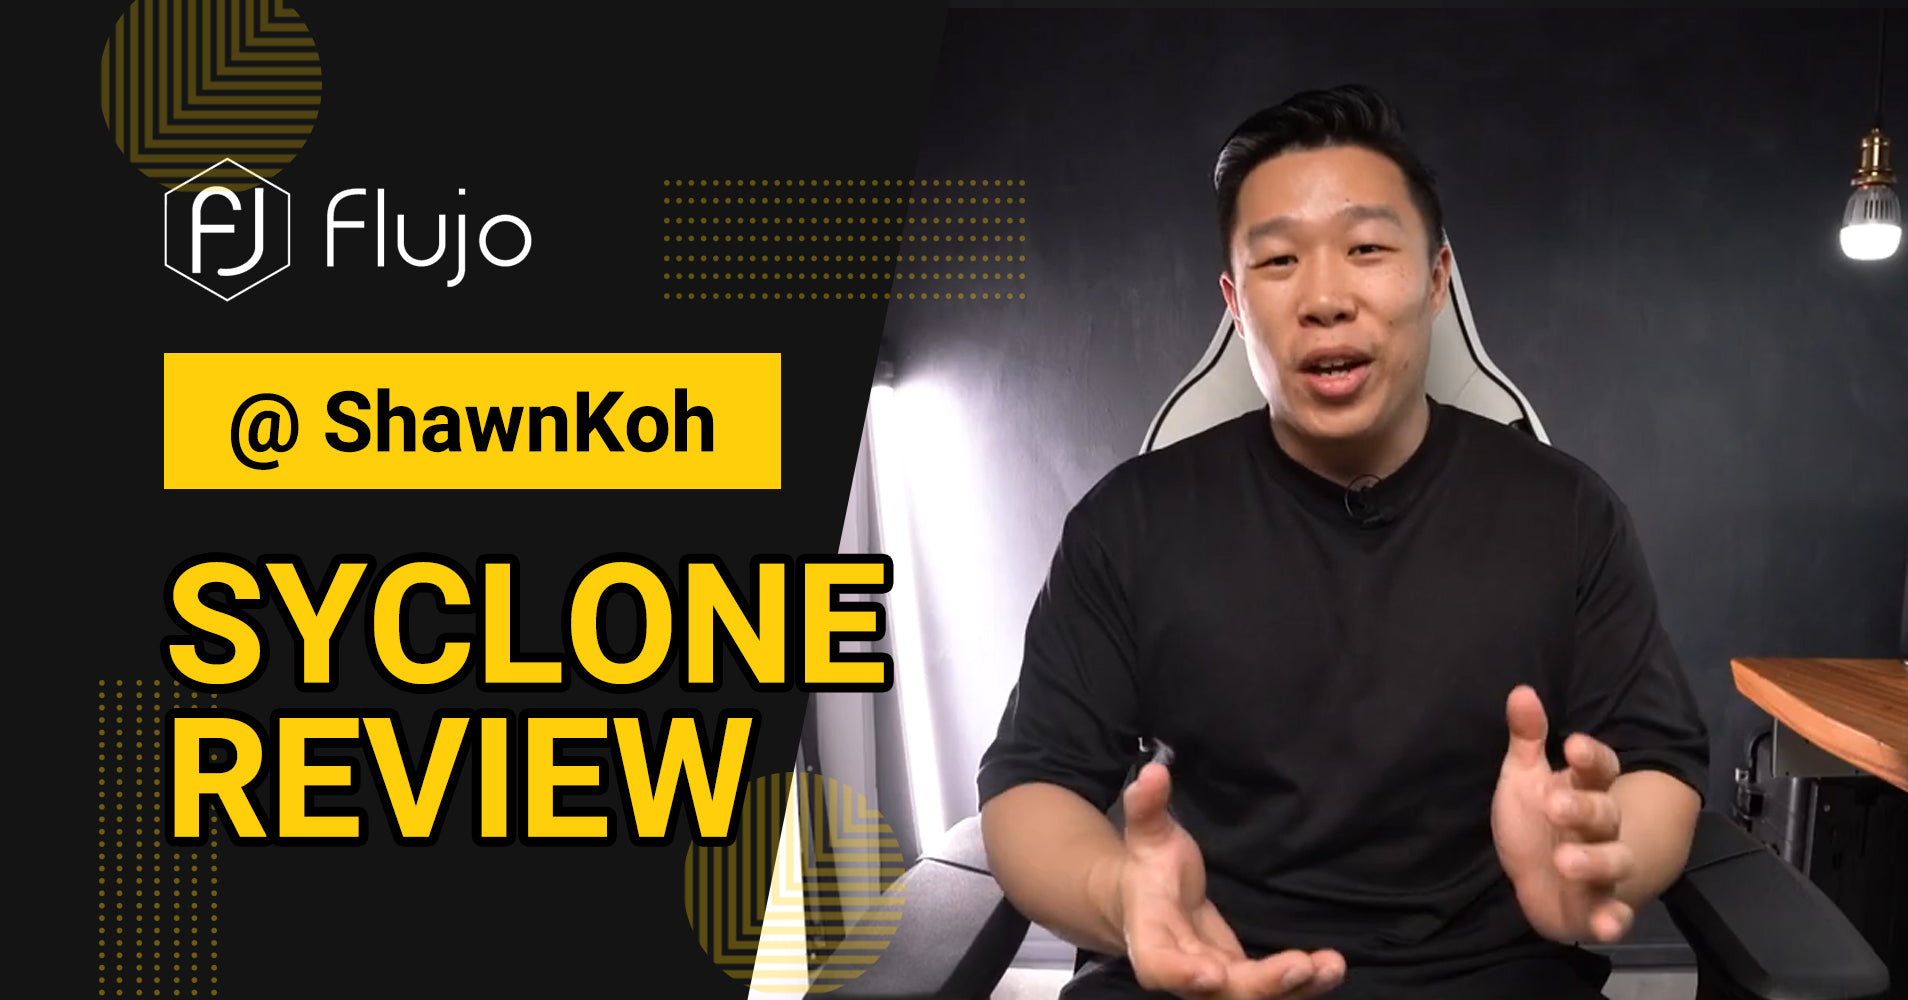 ShawnKoh gives a video review of the Flujo Syclone gaming chair, discussing its features and benefits for gamers and office users alike.